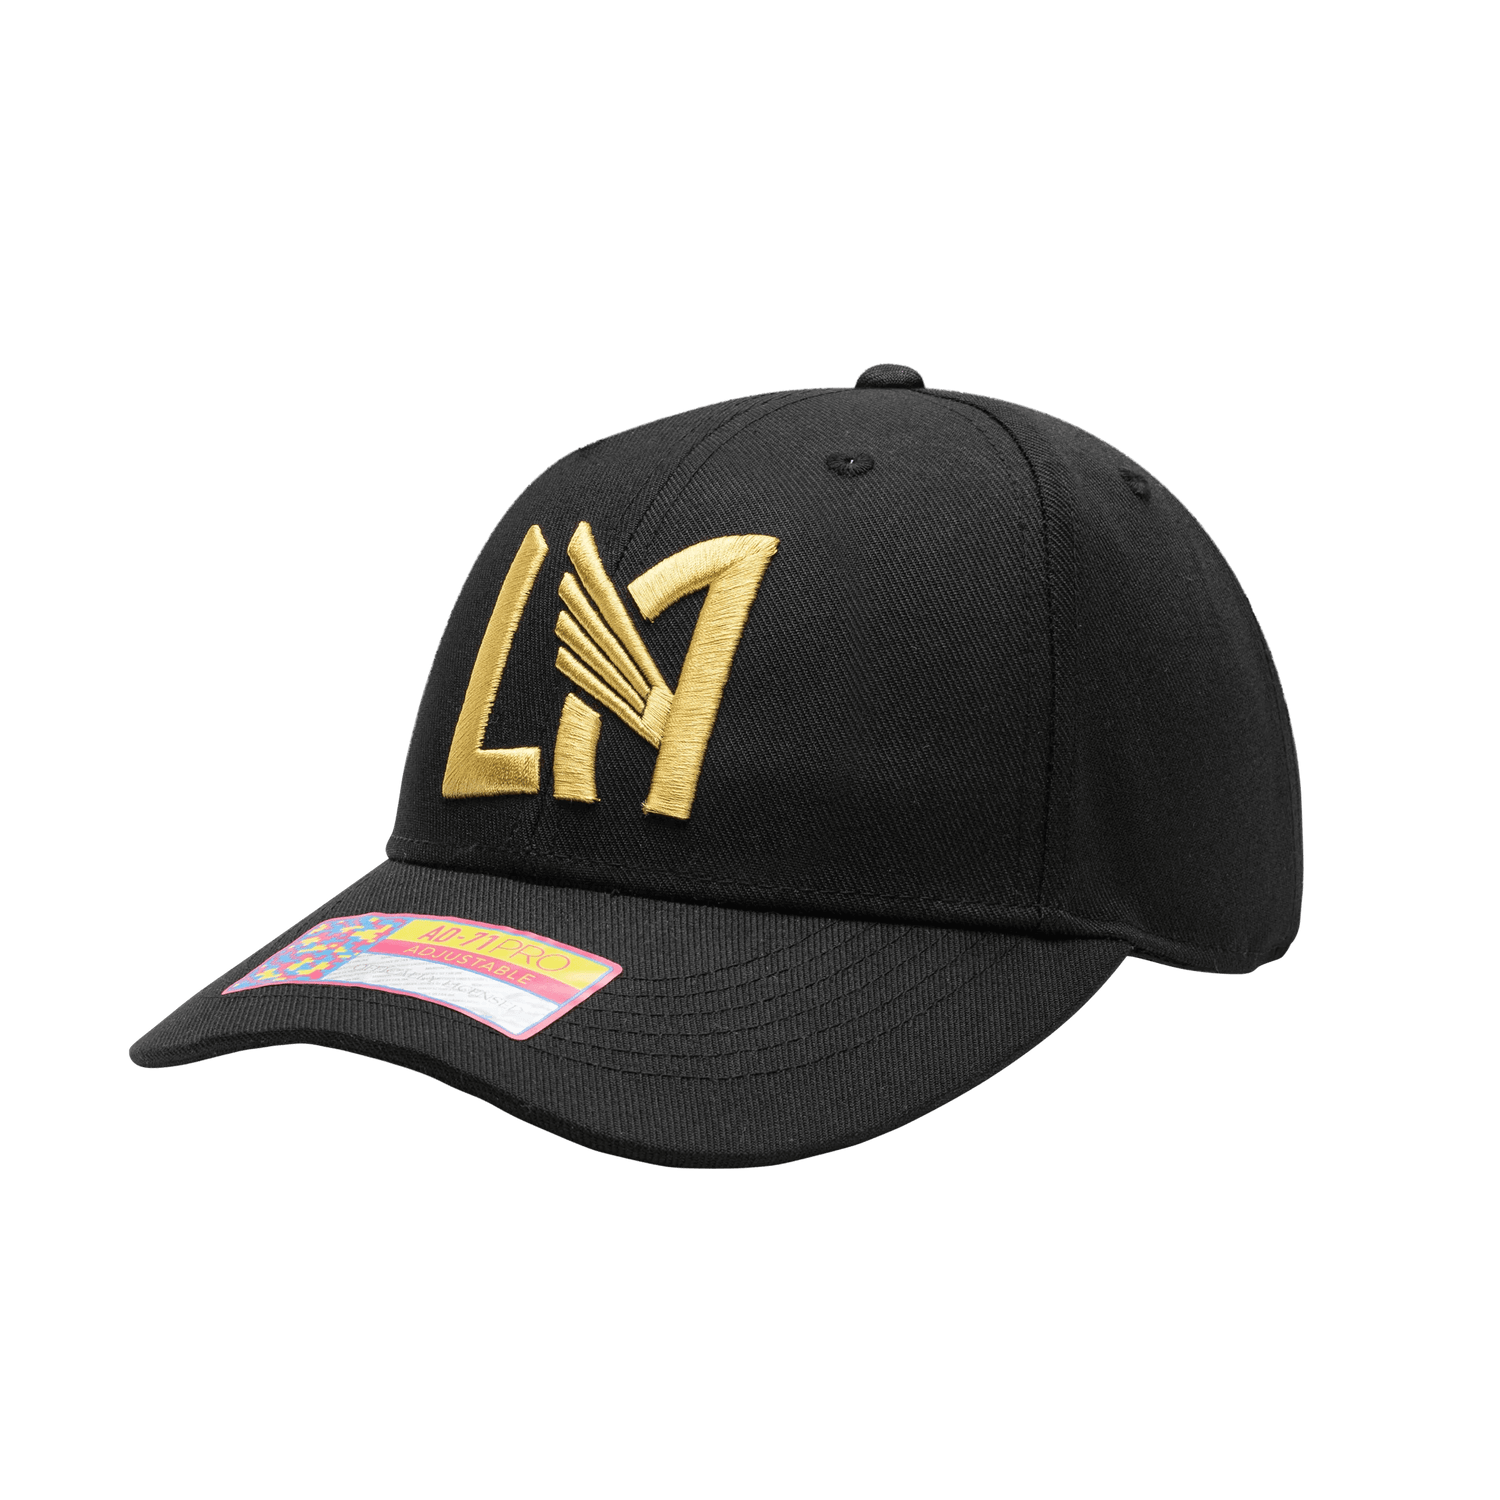 FI Collection LAFC Standard Adjustable Cap (Lateral - Side 1)